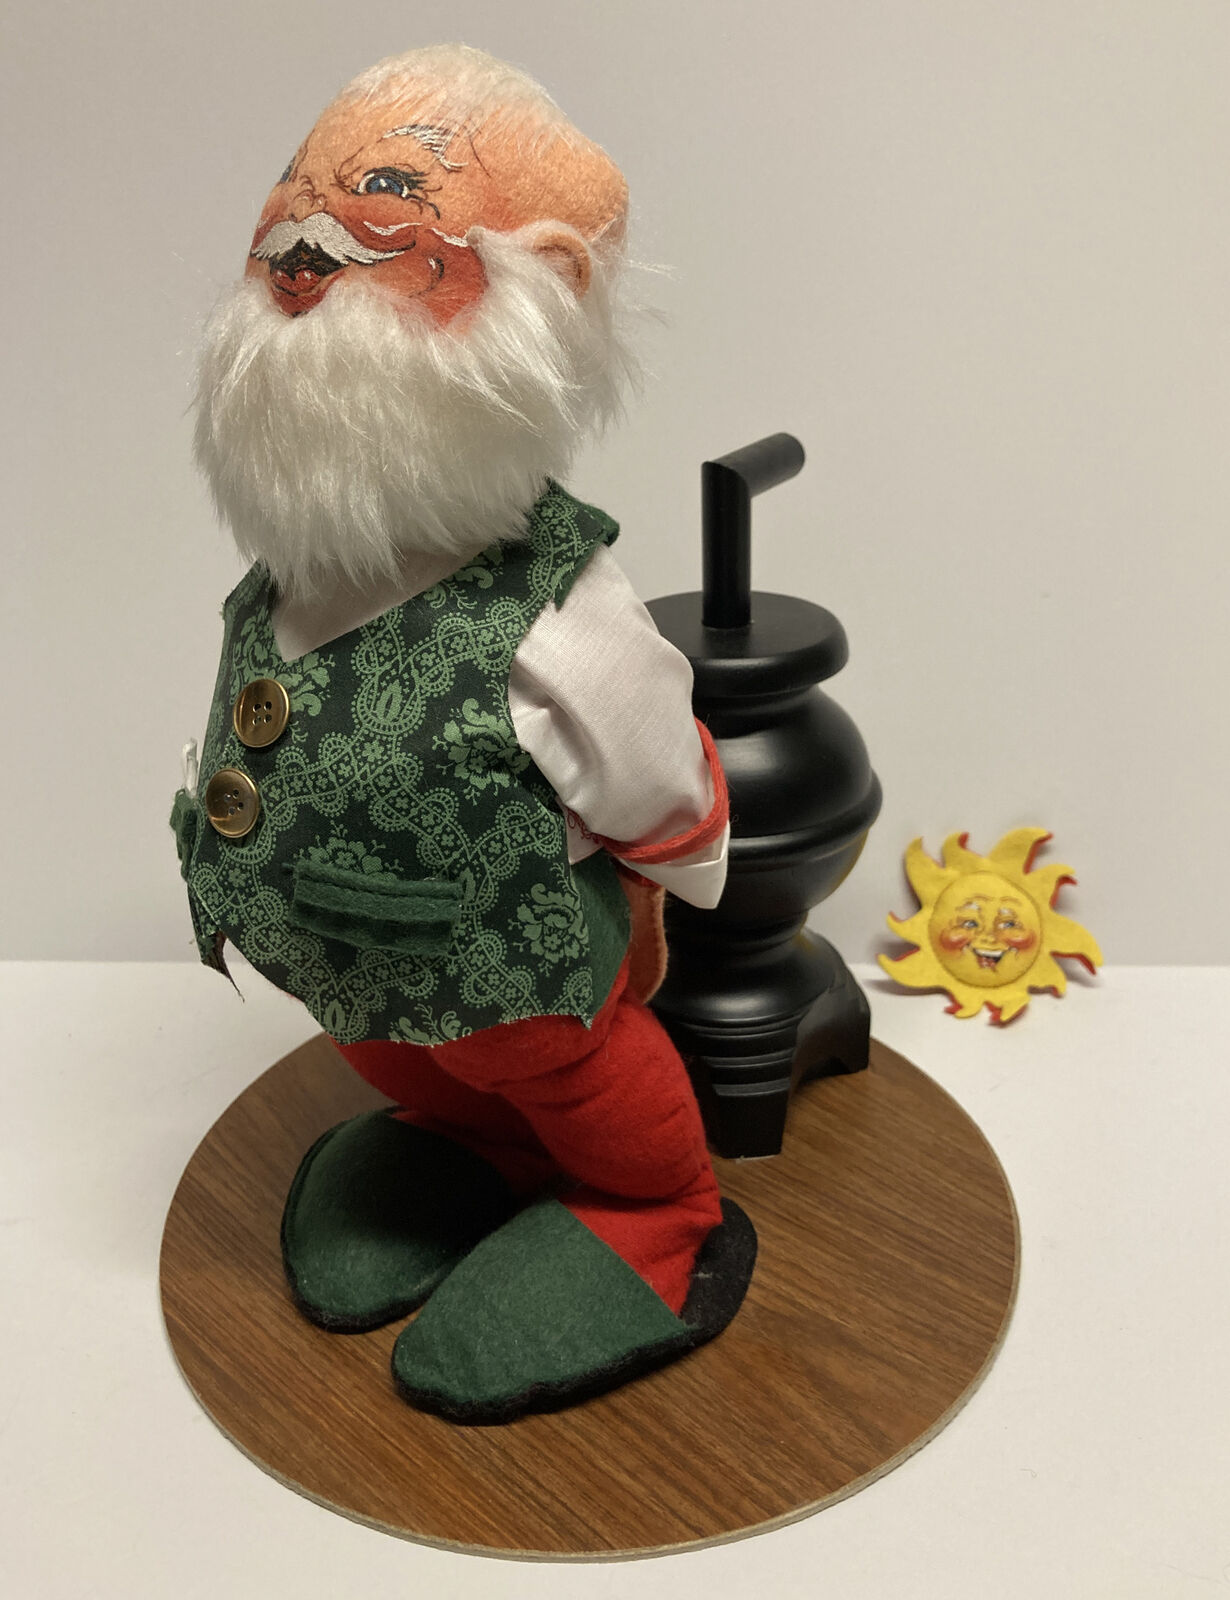 Vintage ‘91 Annalee 12” Santa Claus Warming His Hands with Pot Belly Stove + Sun